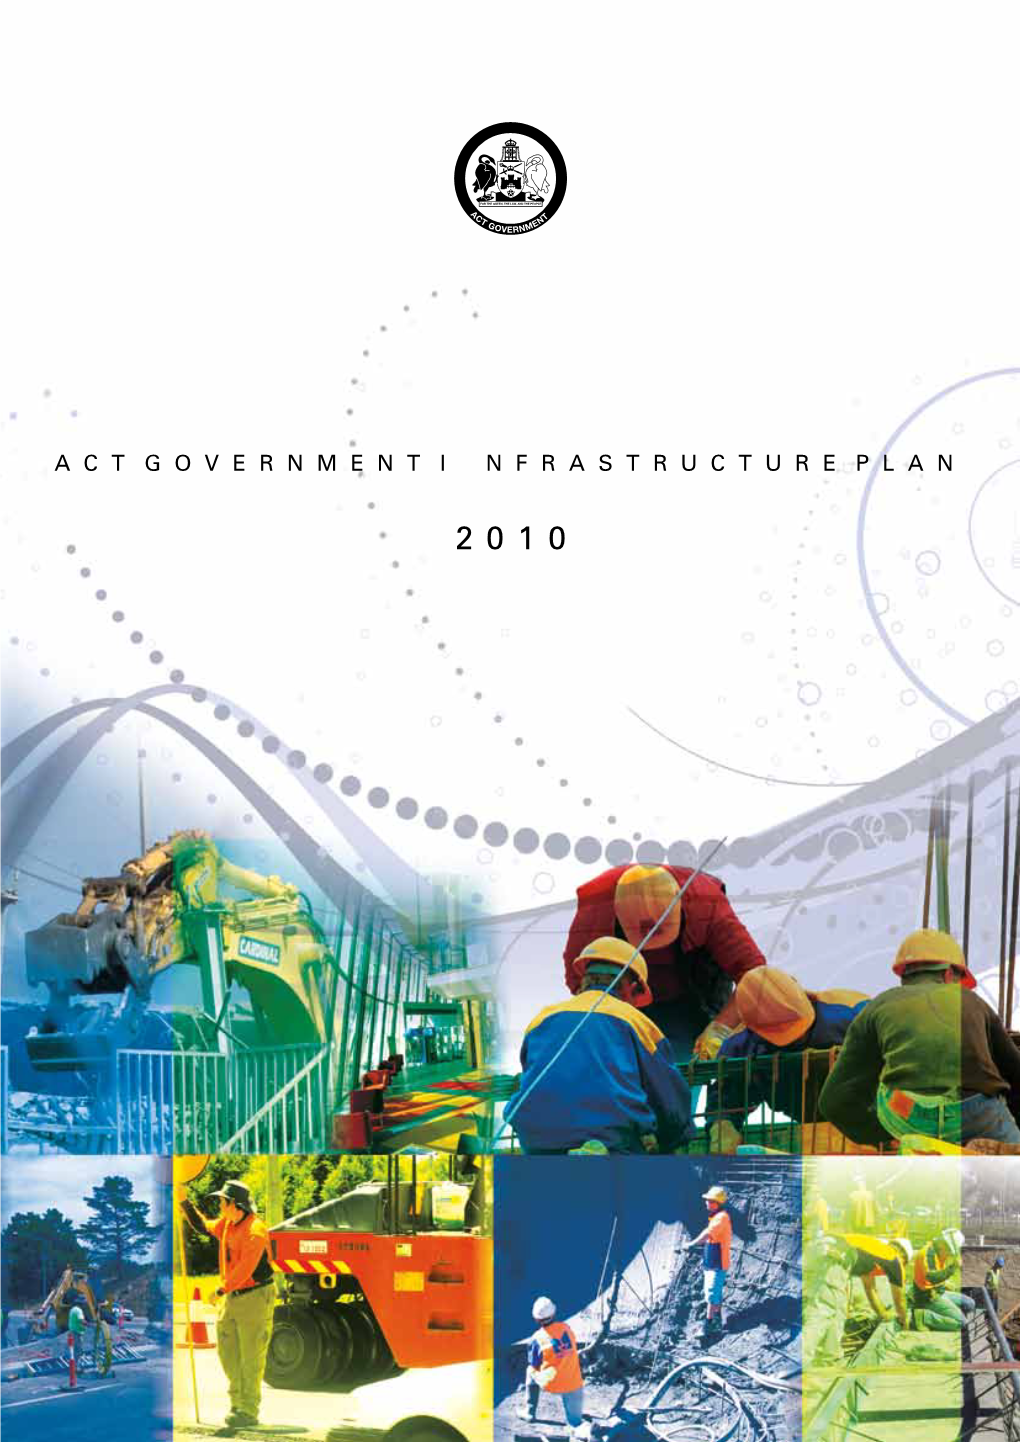 ACT Government Infrastructure Plan 2010